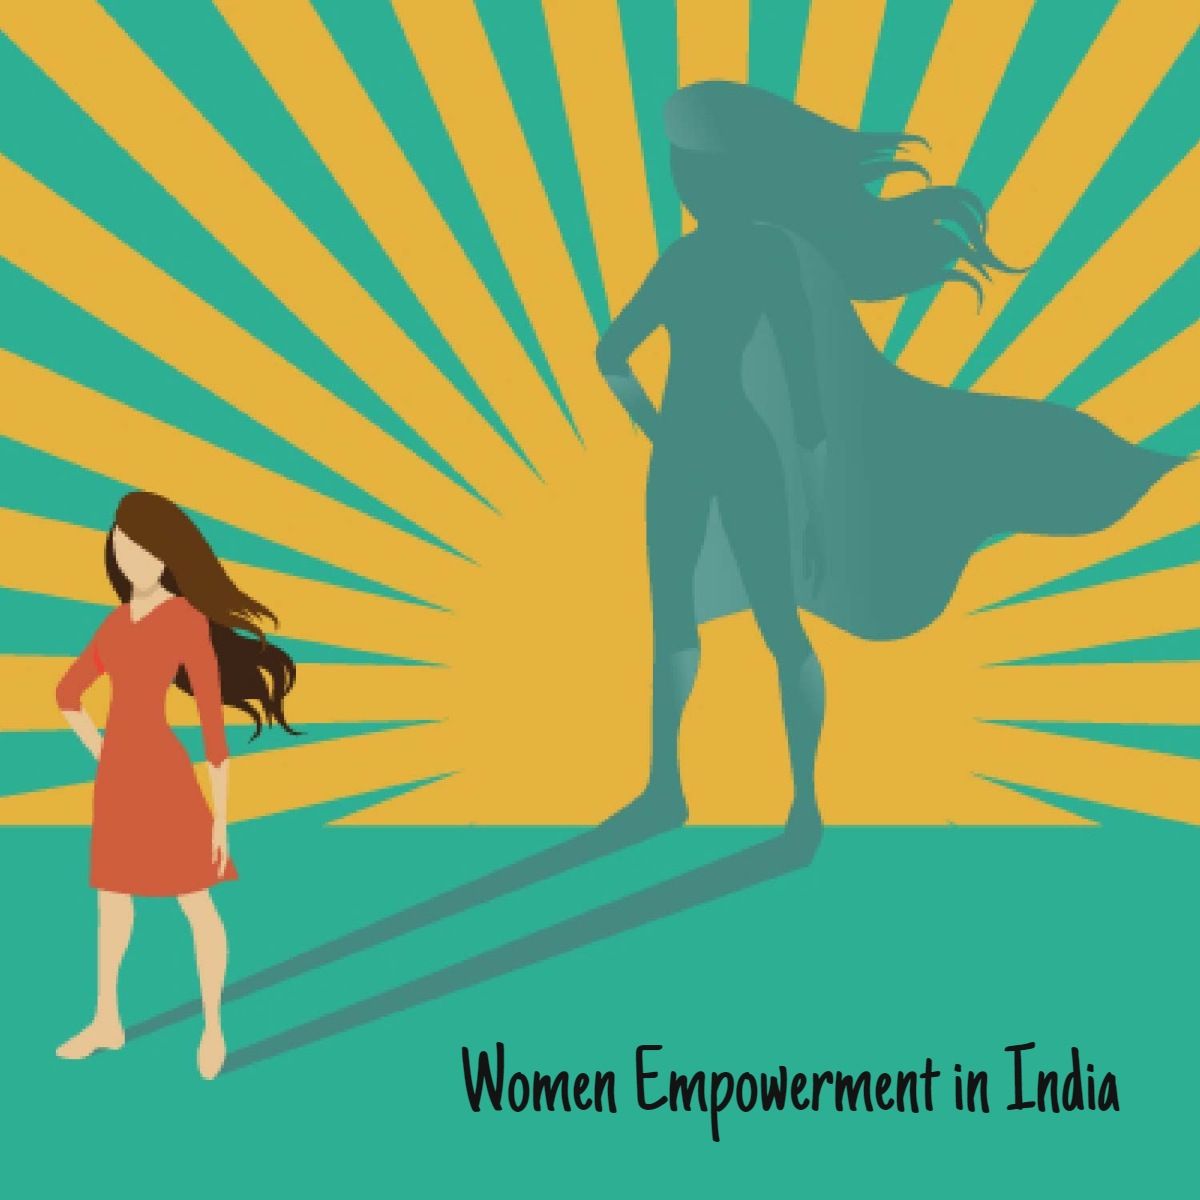 Women Empowerment requires action to boost women's status. We've discussed the schemes launched by the Indian government for 